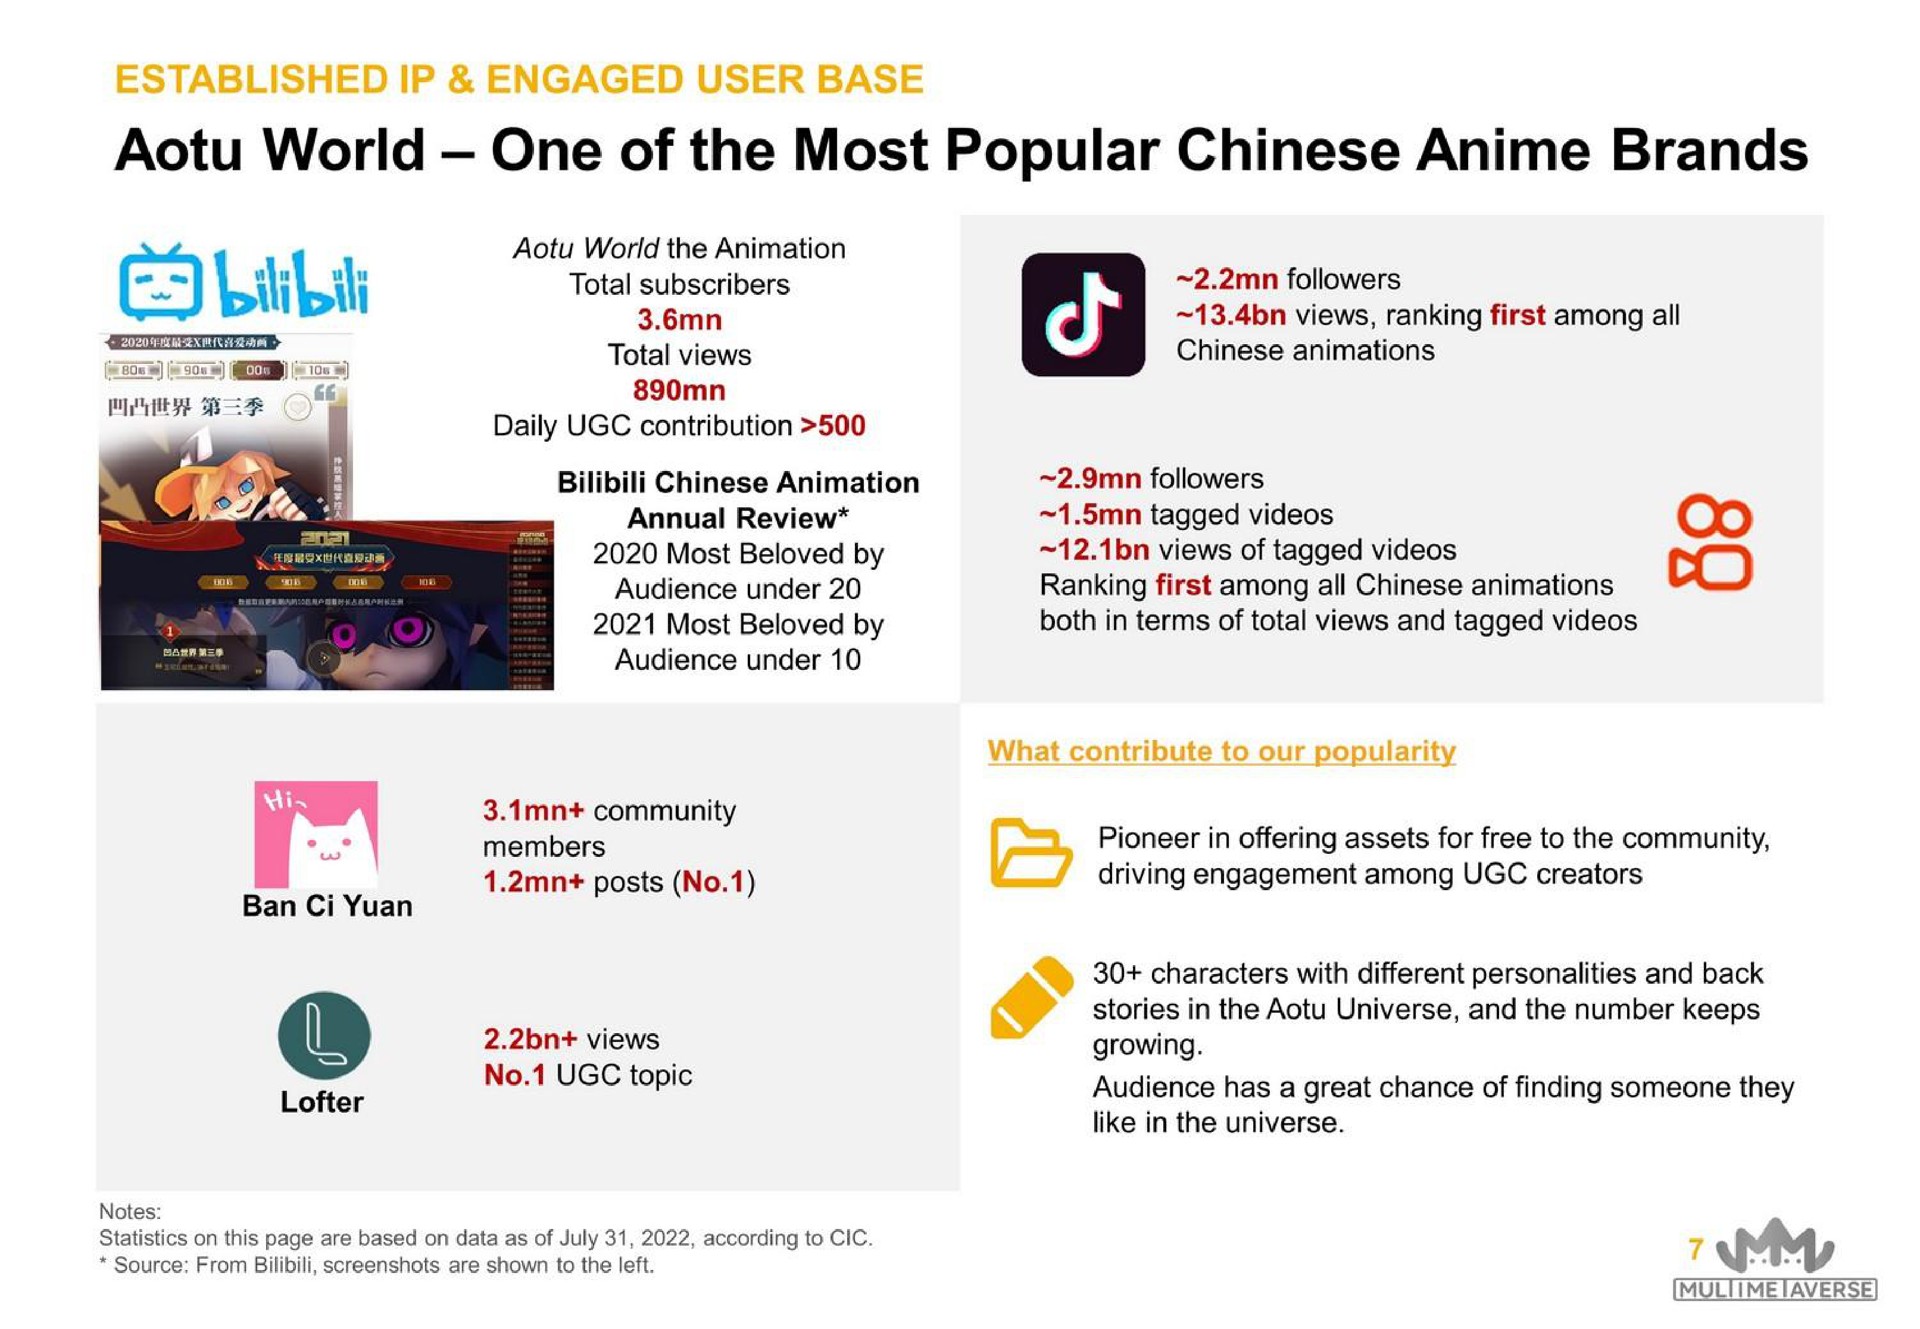 world one of the most popular anime brands | MultiMetaVerse